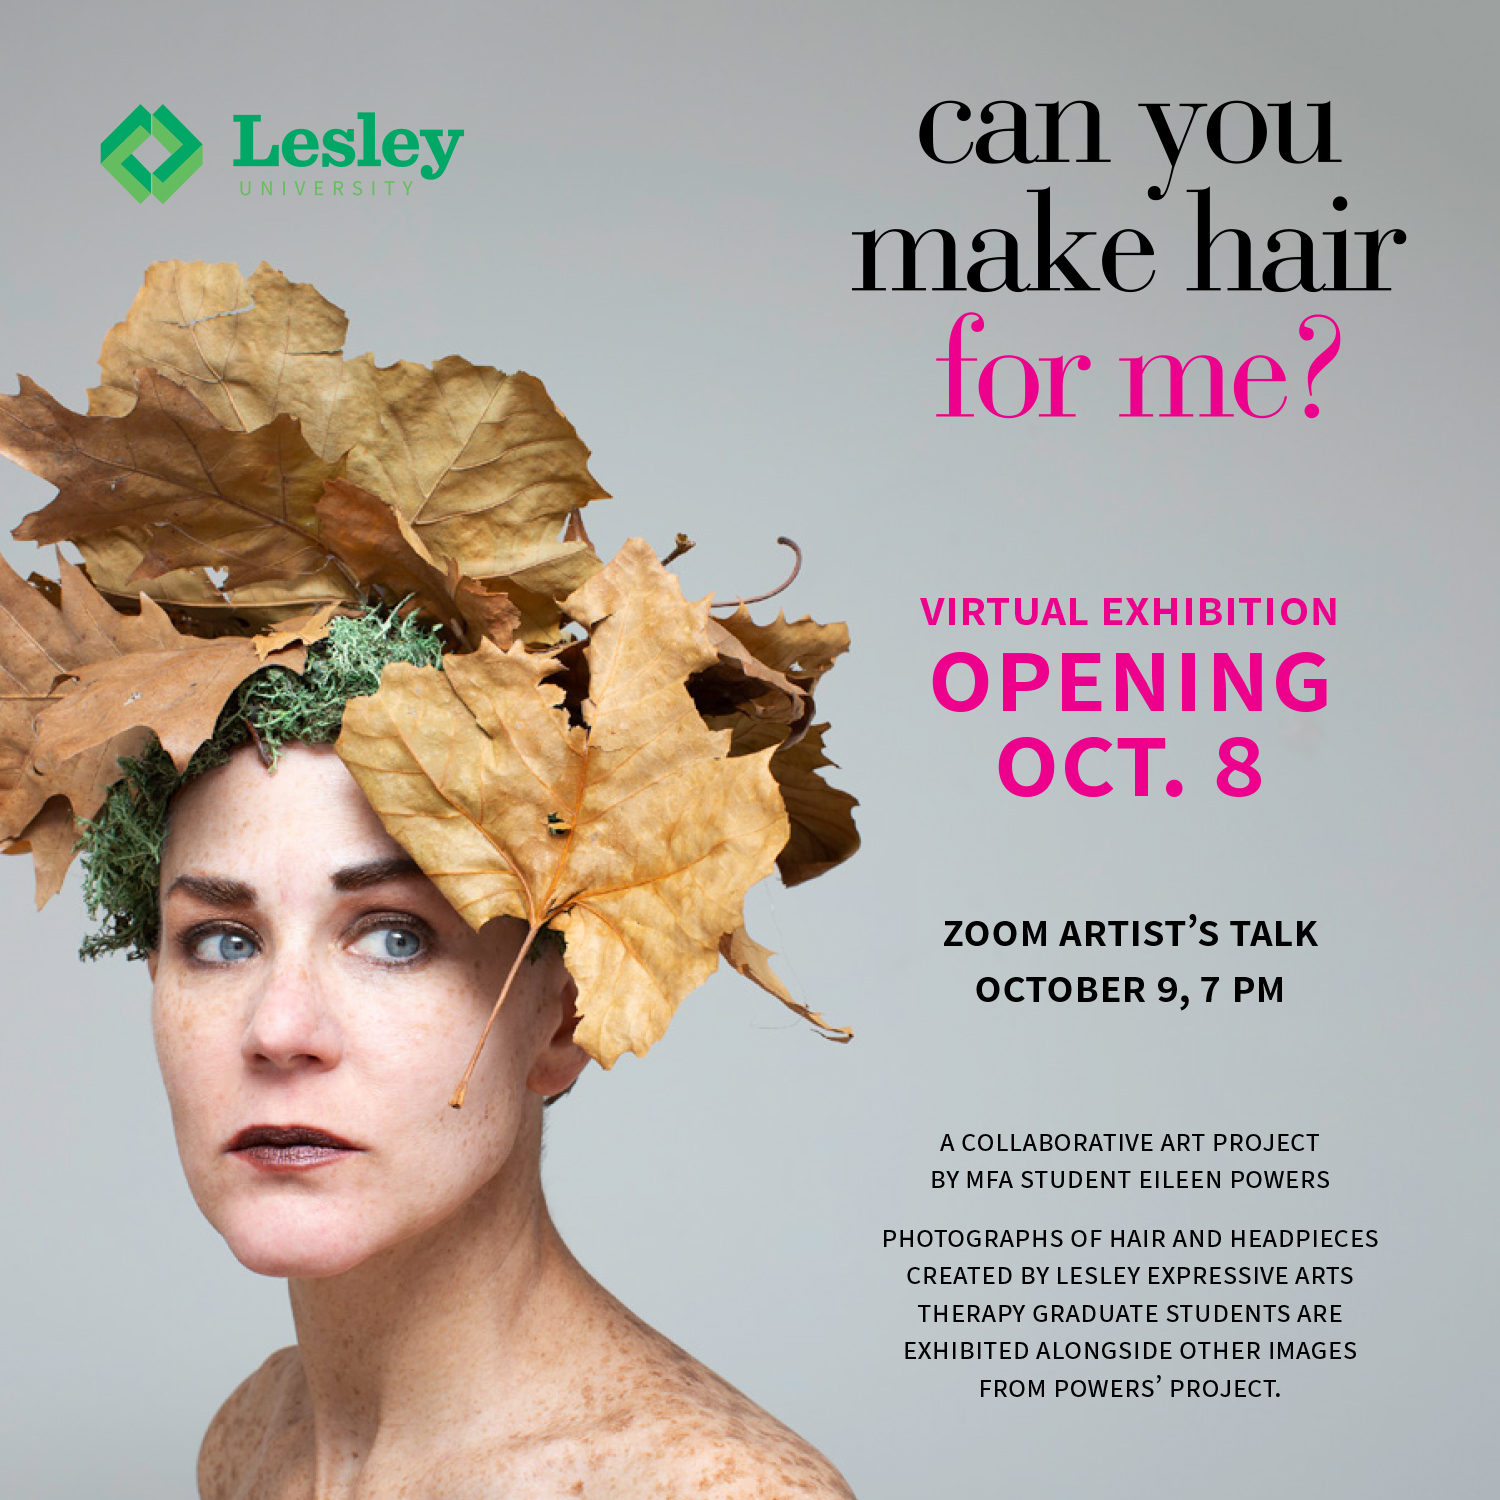 Lesley University Virtual Exhibition Can you make hair for me?